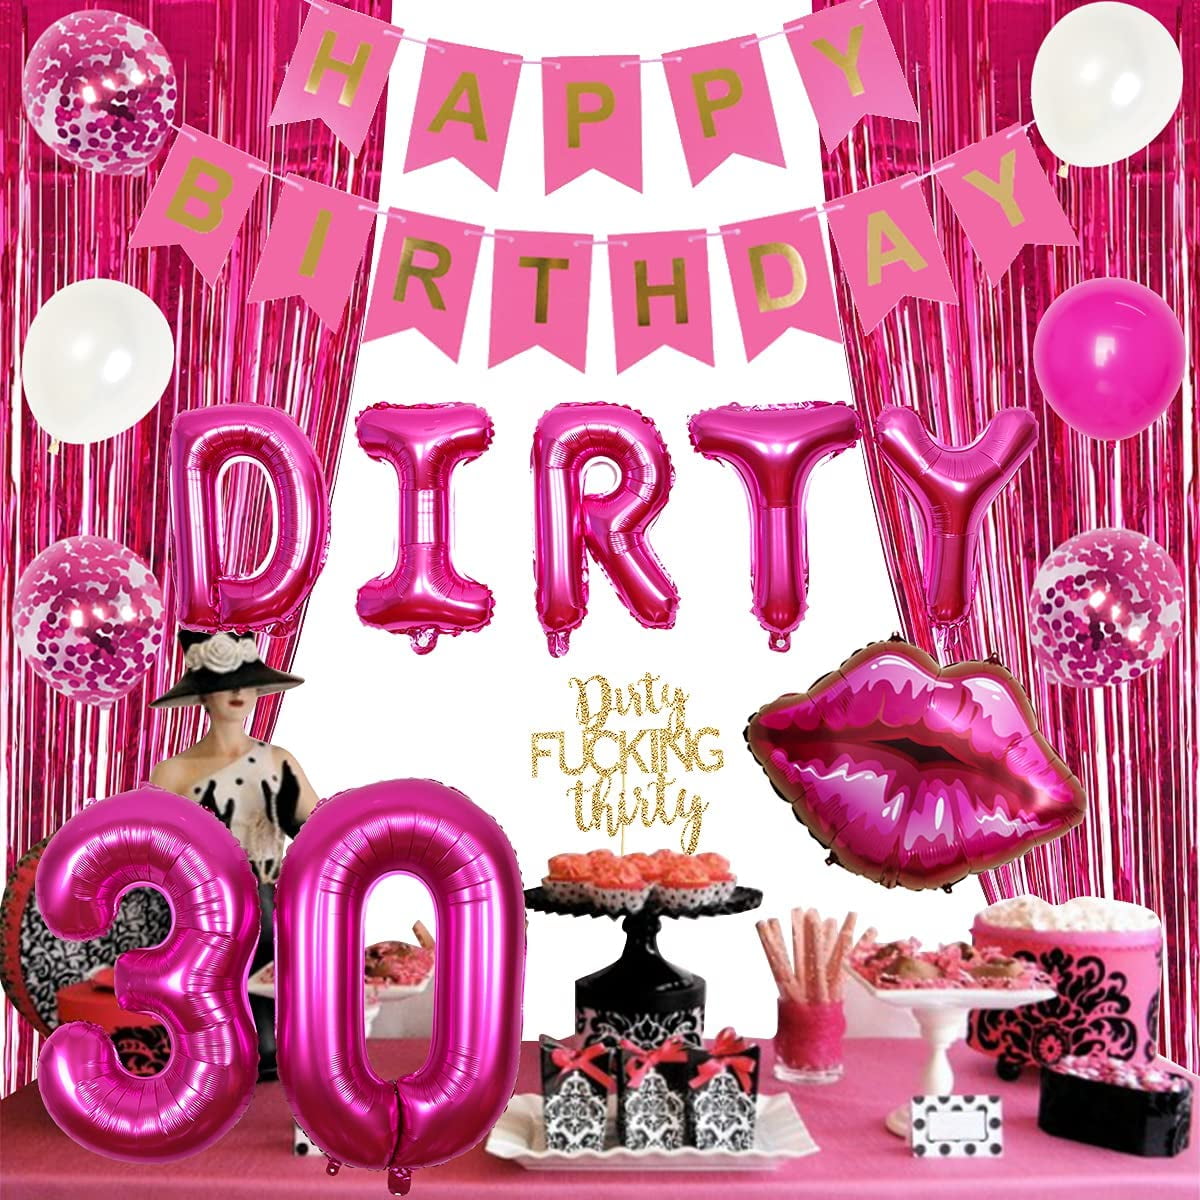 30th Birthday Party Decorations for Her Hot Pink Dirty Thirty Banner Balloon Dirty 30 Sash Cake Topper for 30 Years Old Birthday Party Supplies, Hot Pink 30th Birthday Decorations for Women - Walmart.com